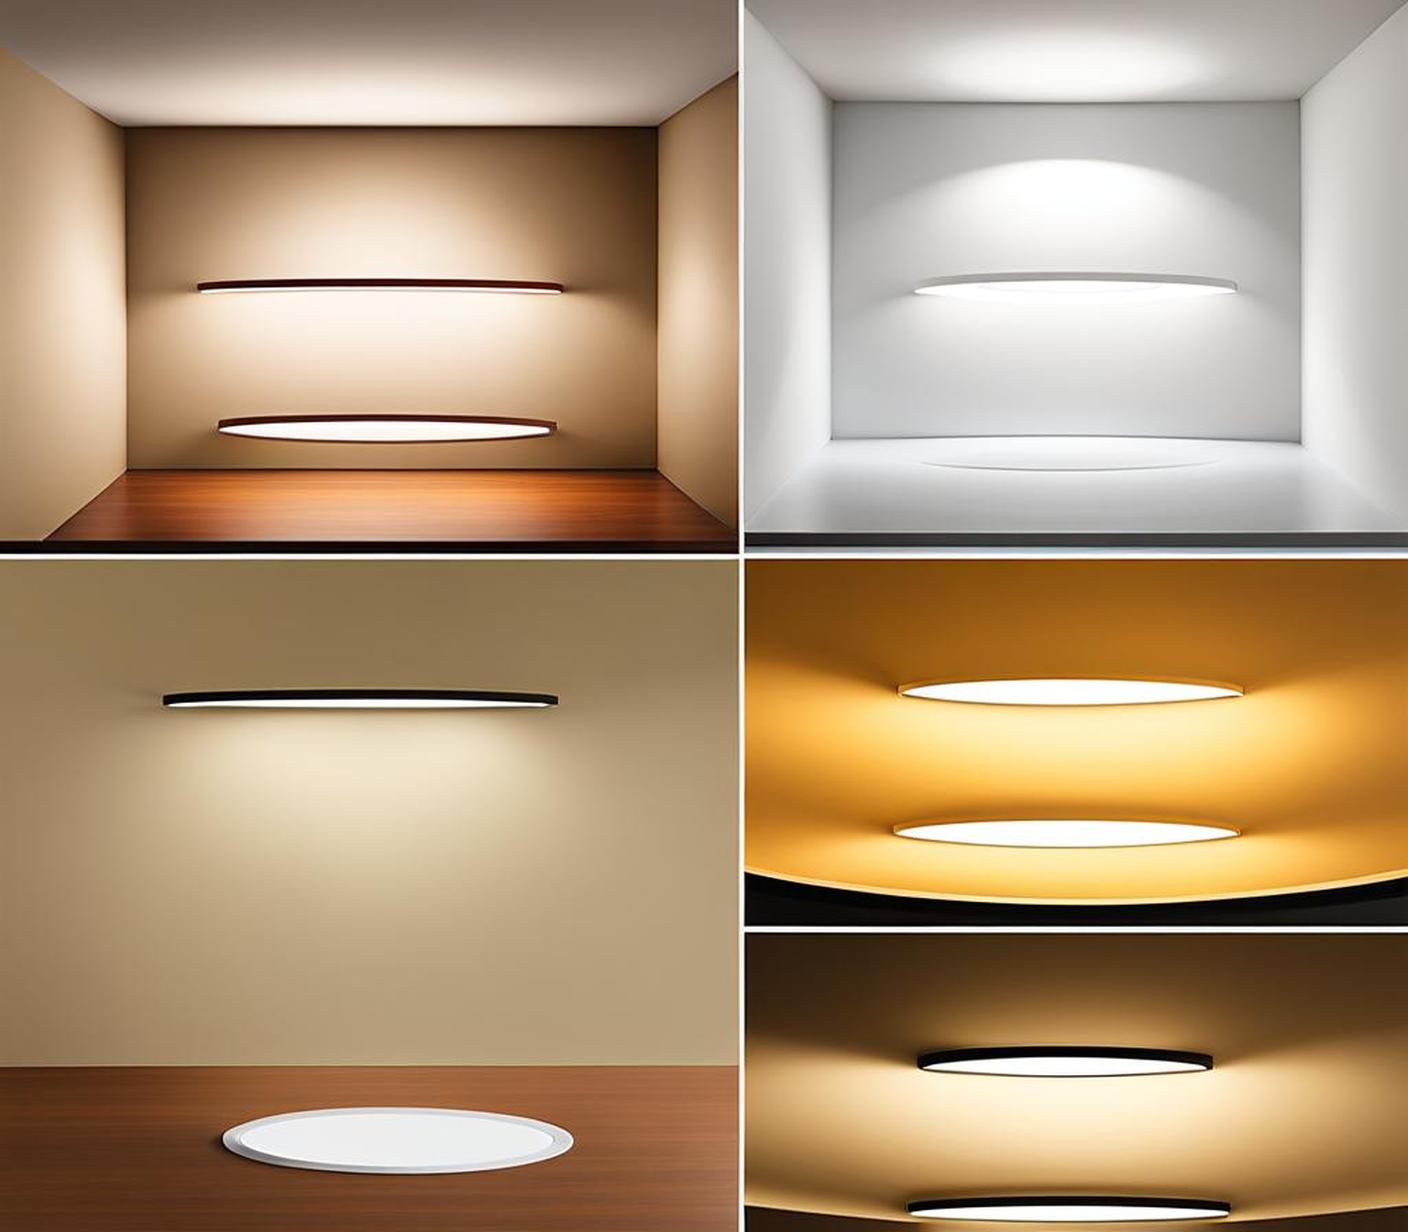 shades for recessed lighting